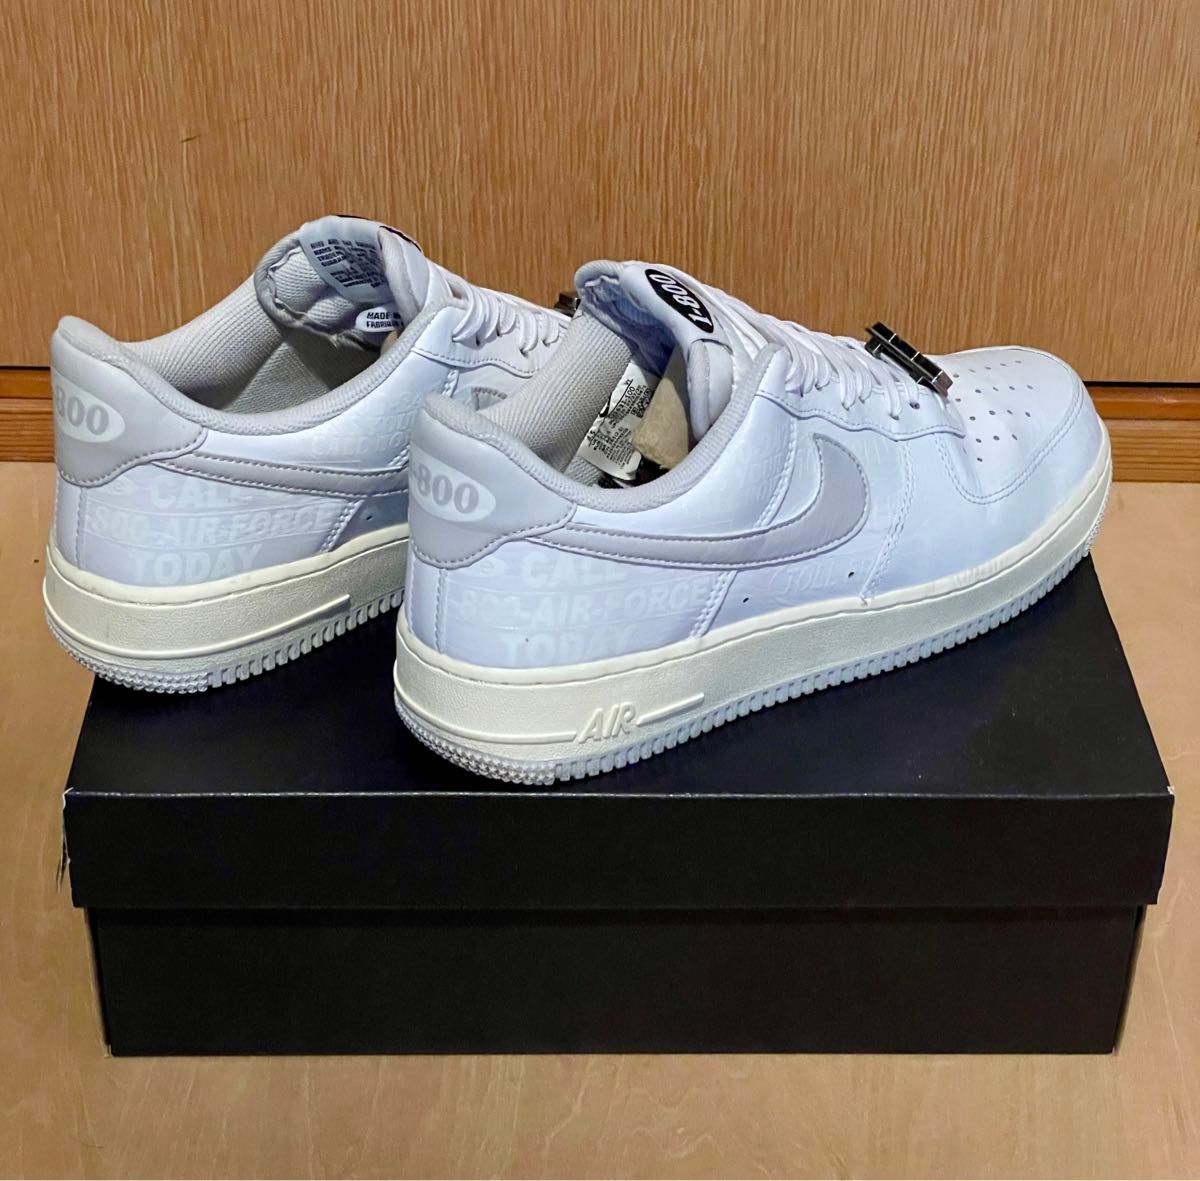 Nike Air Force 1 Low 1-800 "White"  26.5cm US8.5